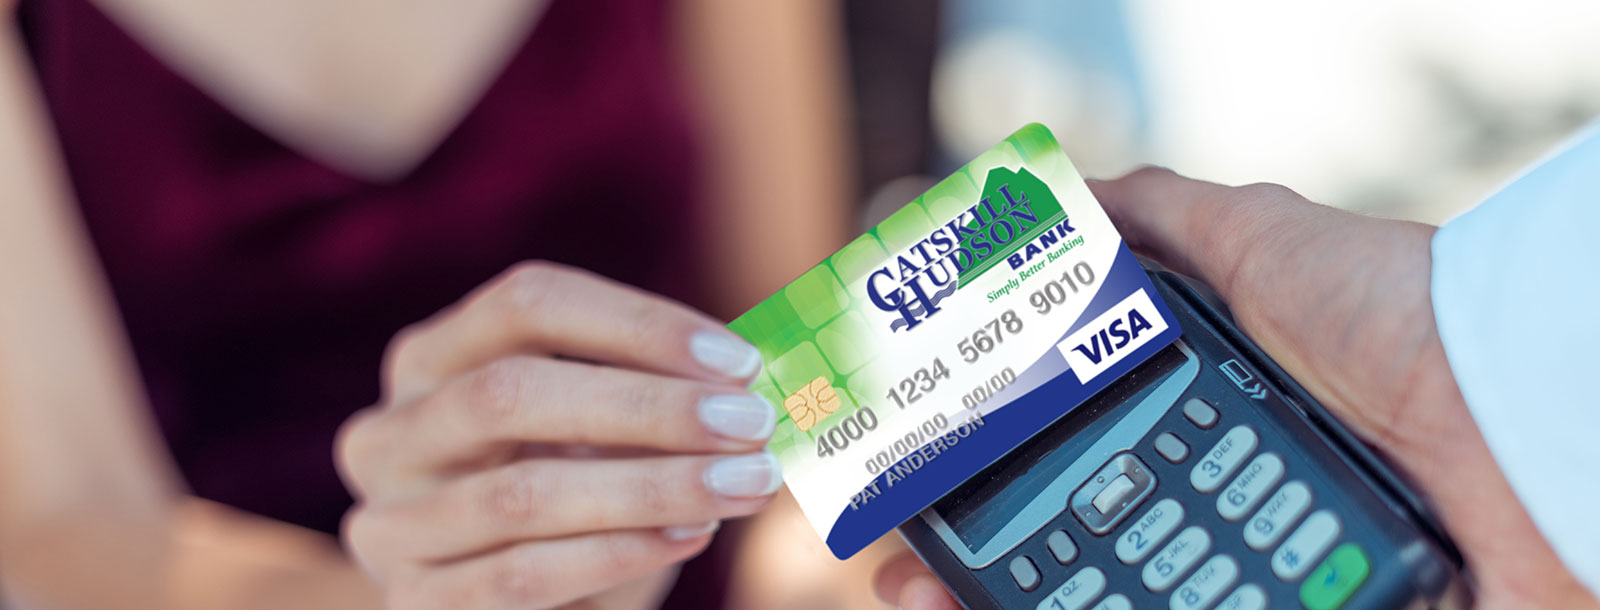 credit and debit card image